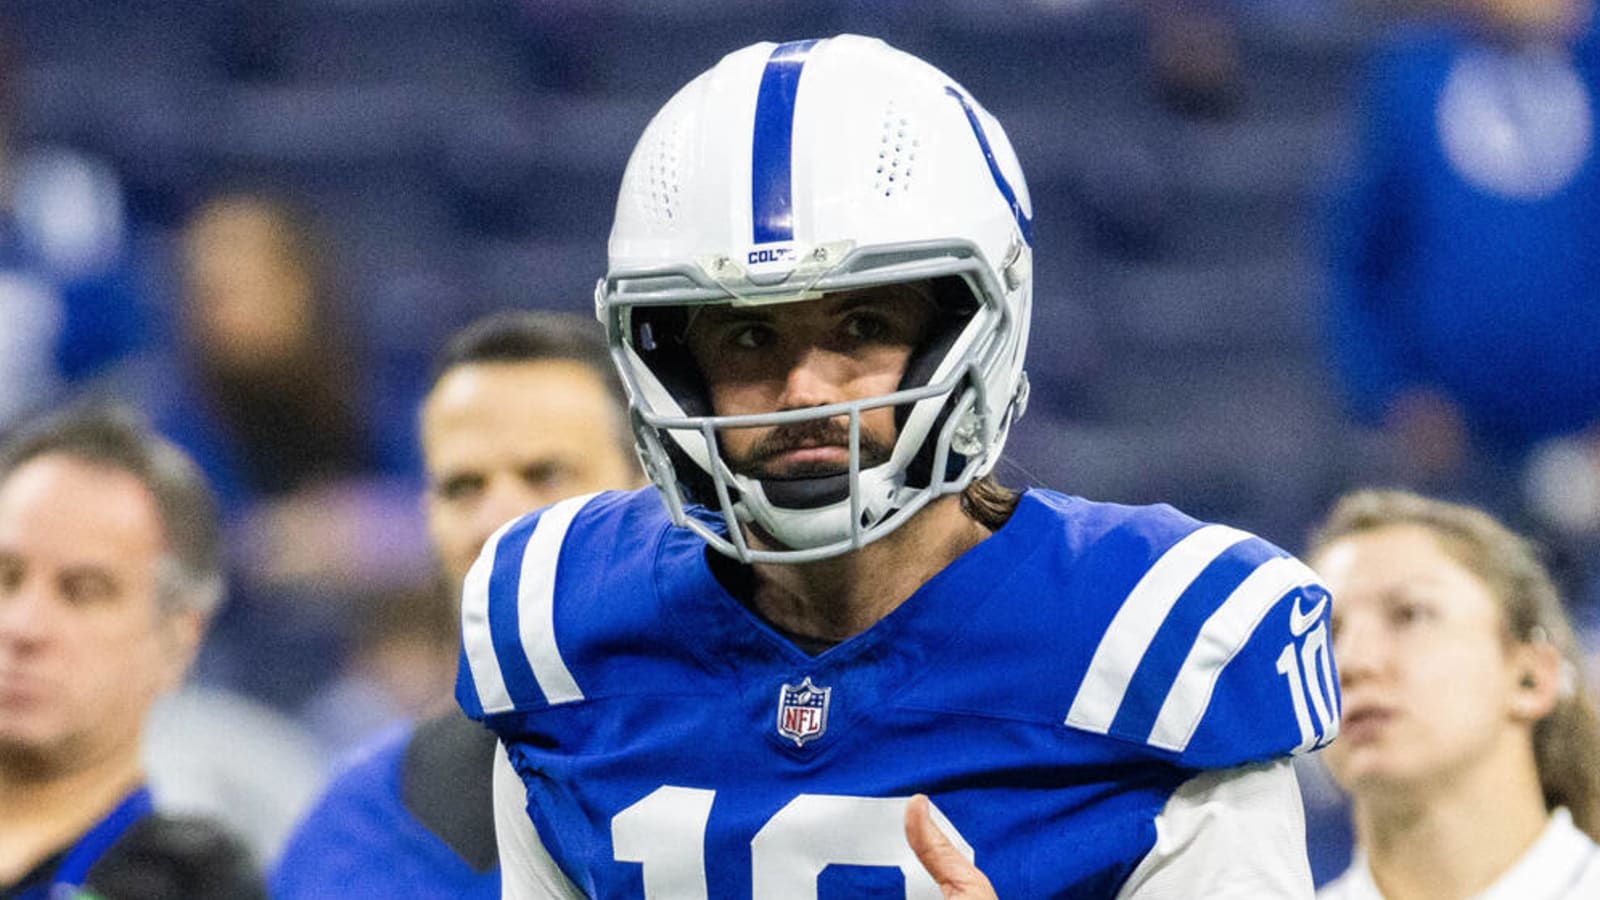 Addition of Colts QB to Pro Bowl roster shows why event should be abolished